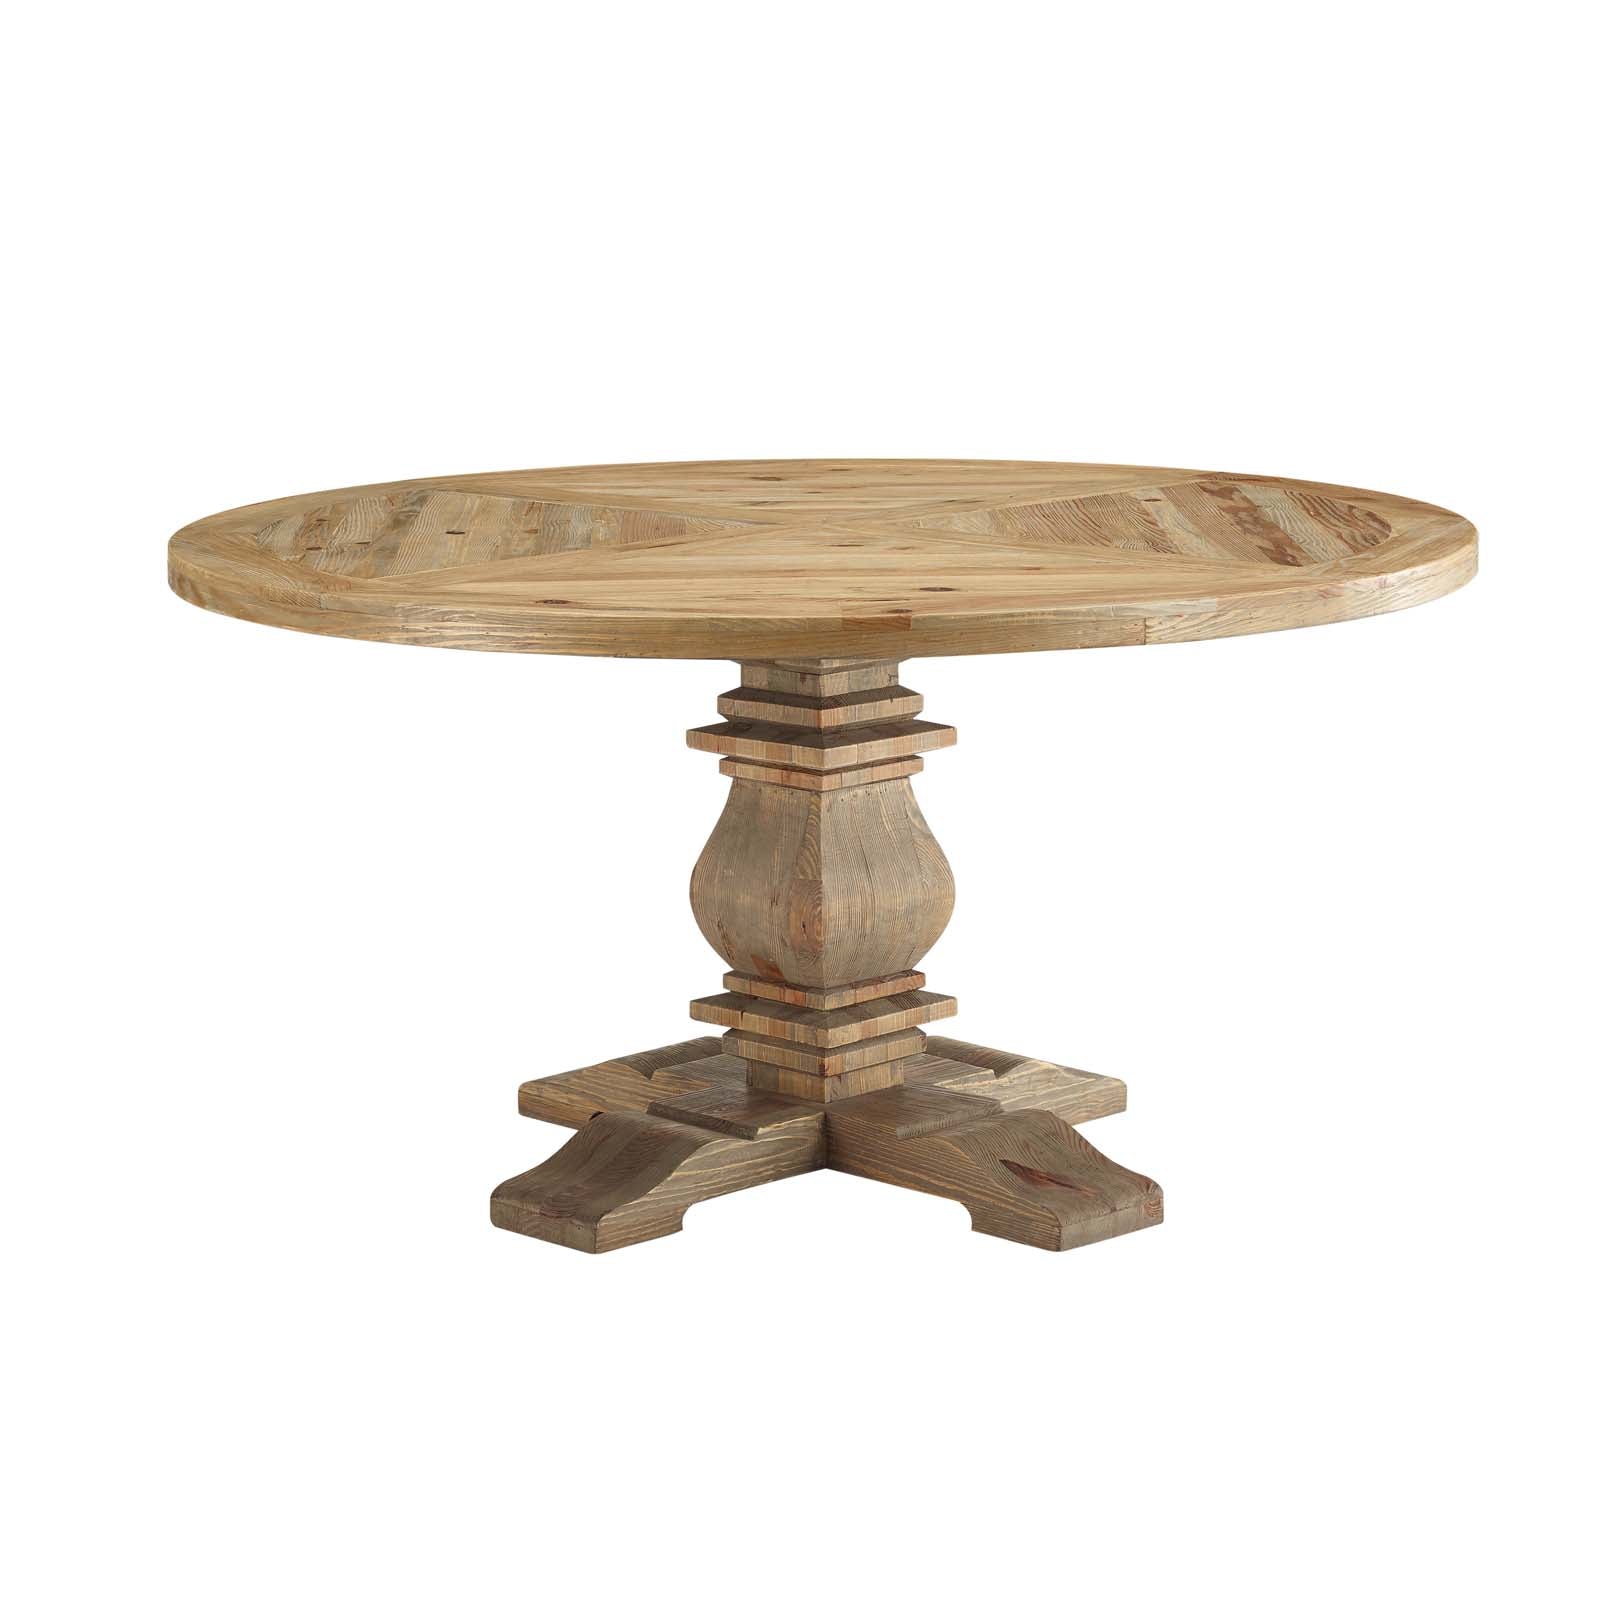 Column 59" Round Pine Wood Dining Table - East Shore Modern Home Furnishings